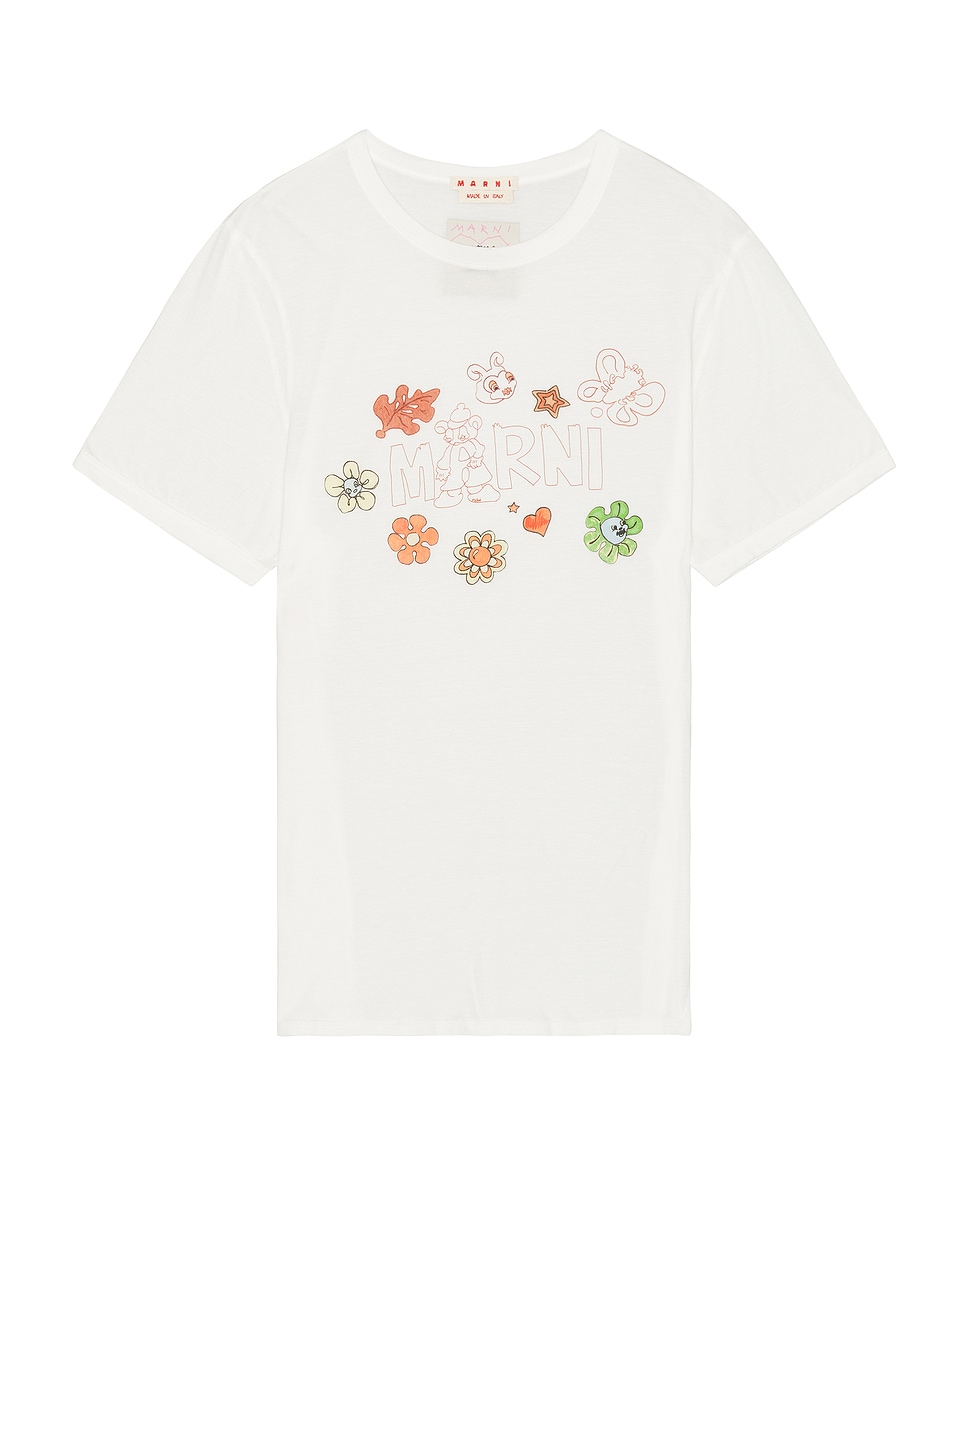 Image 1 of Marni X Paloma Funky Charm Explosion T-shirt in Lily White